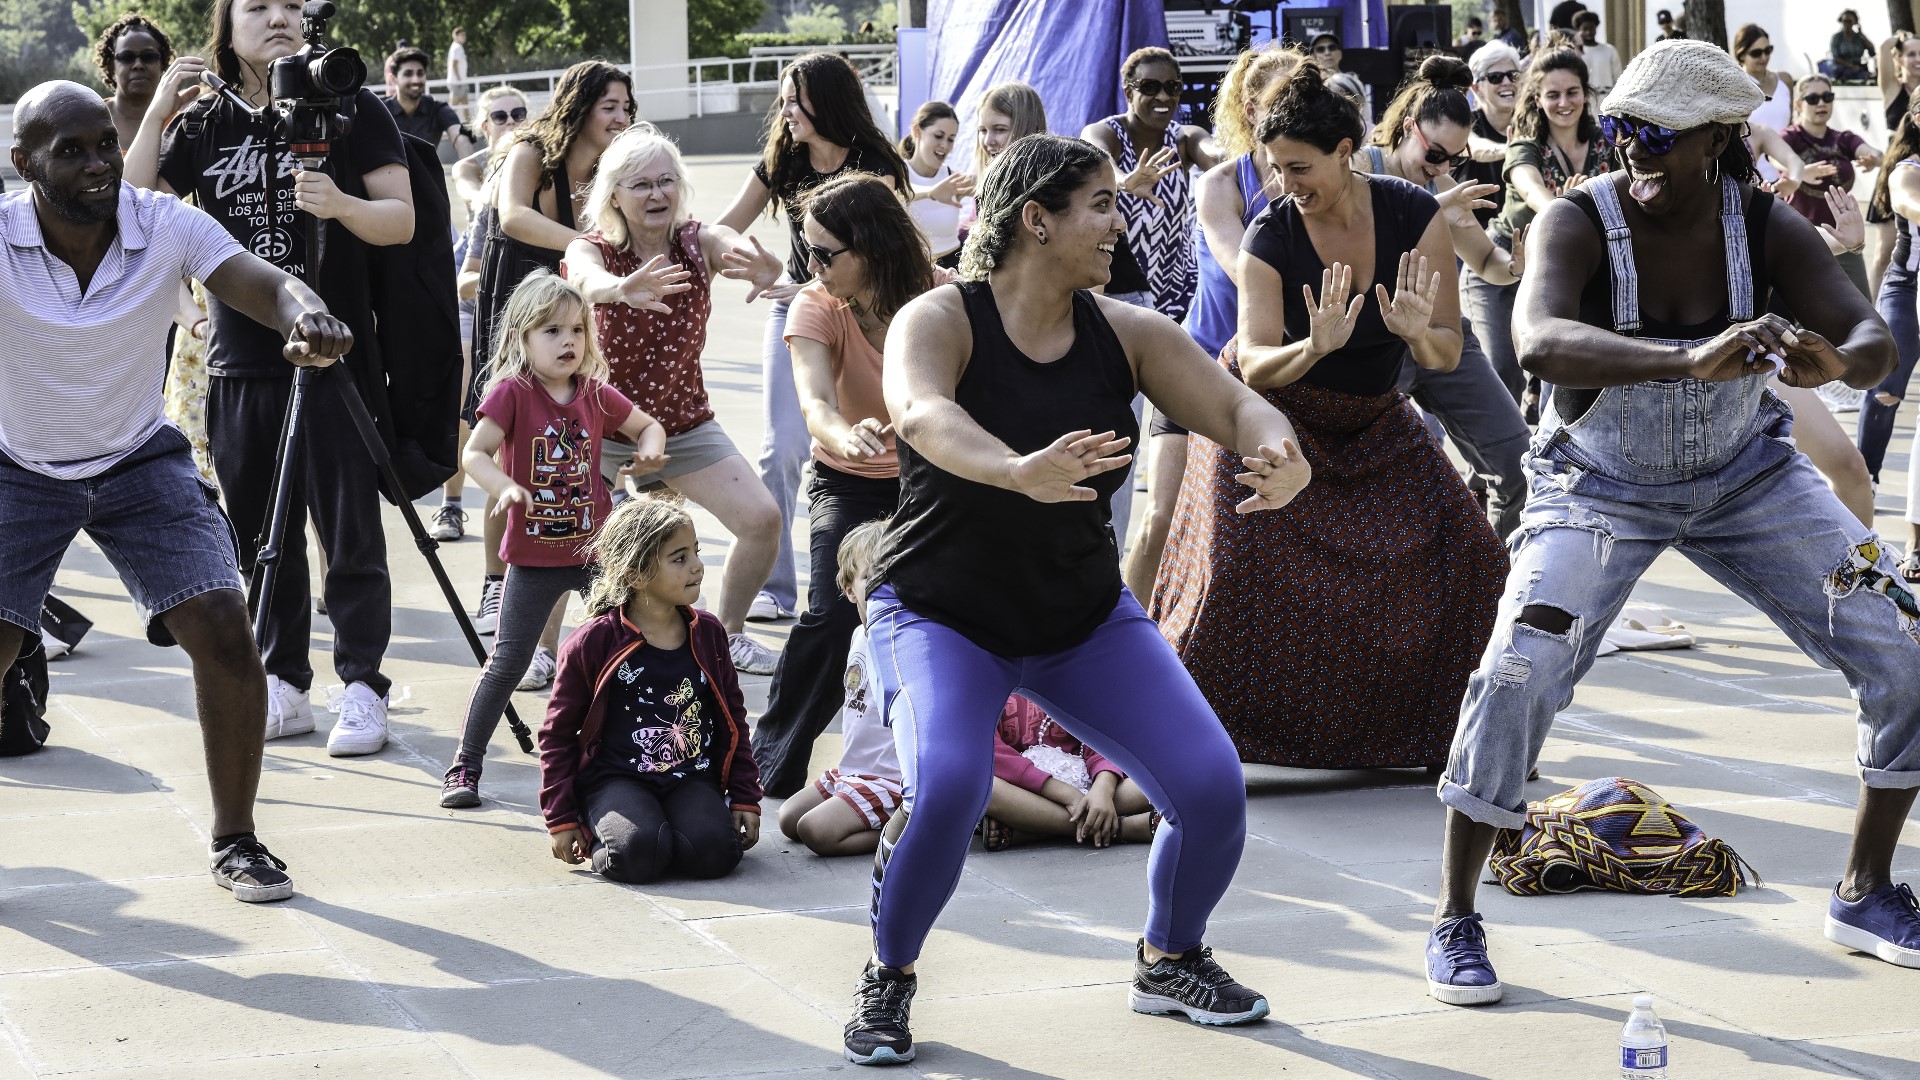 Chitra Subramanian and Lauren DeVera, the co-curators of The Kennedy Center's National Dance Day, share what to expect at this free community event on Sept. 16th.